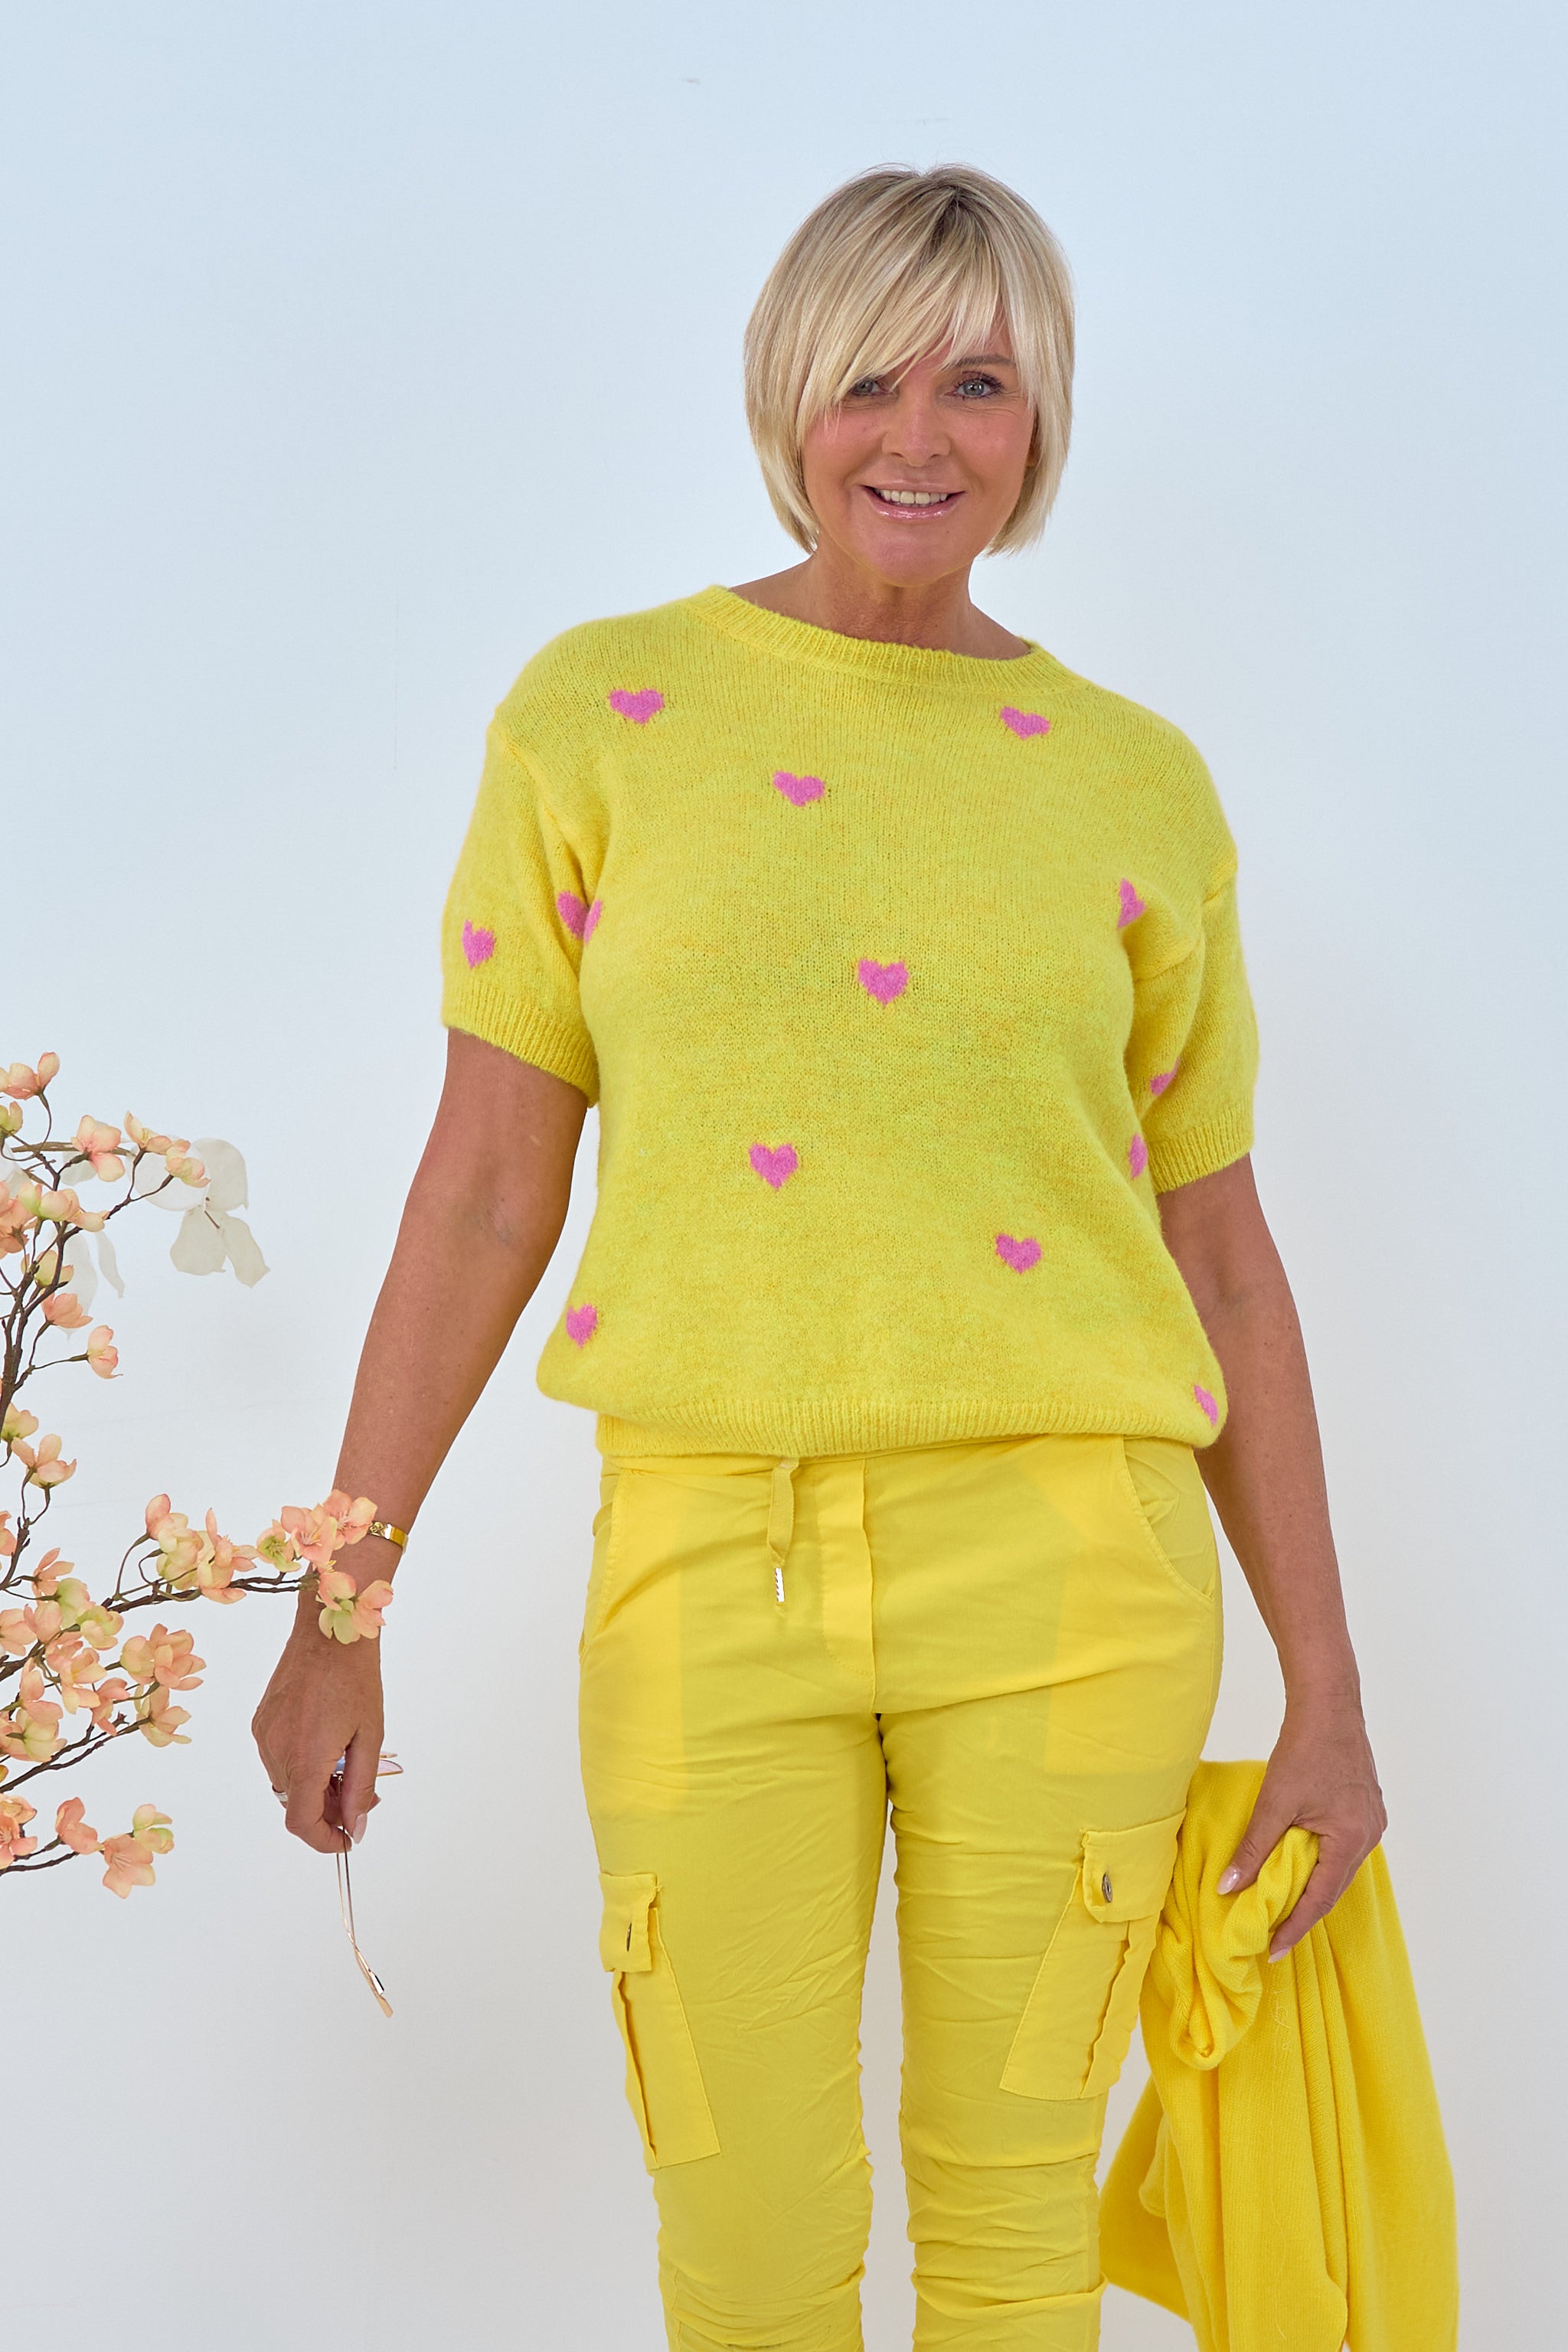 Short-sleeved fine-knit sweater with hearts, yellow-pink